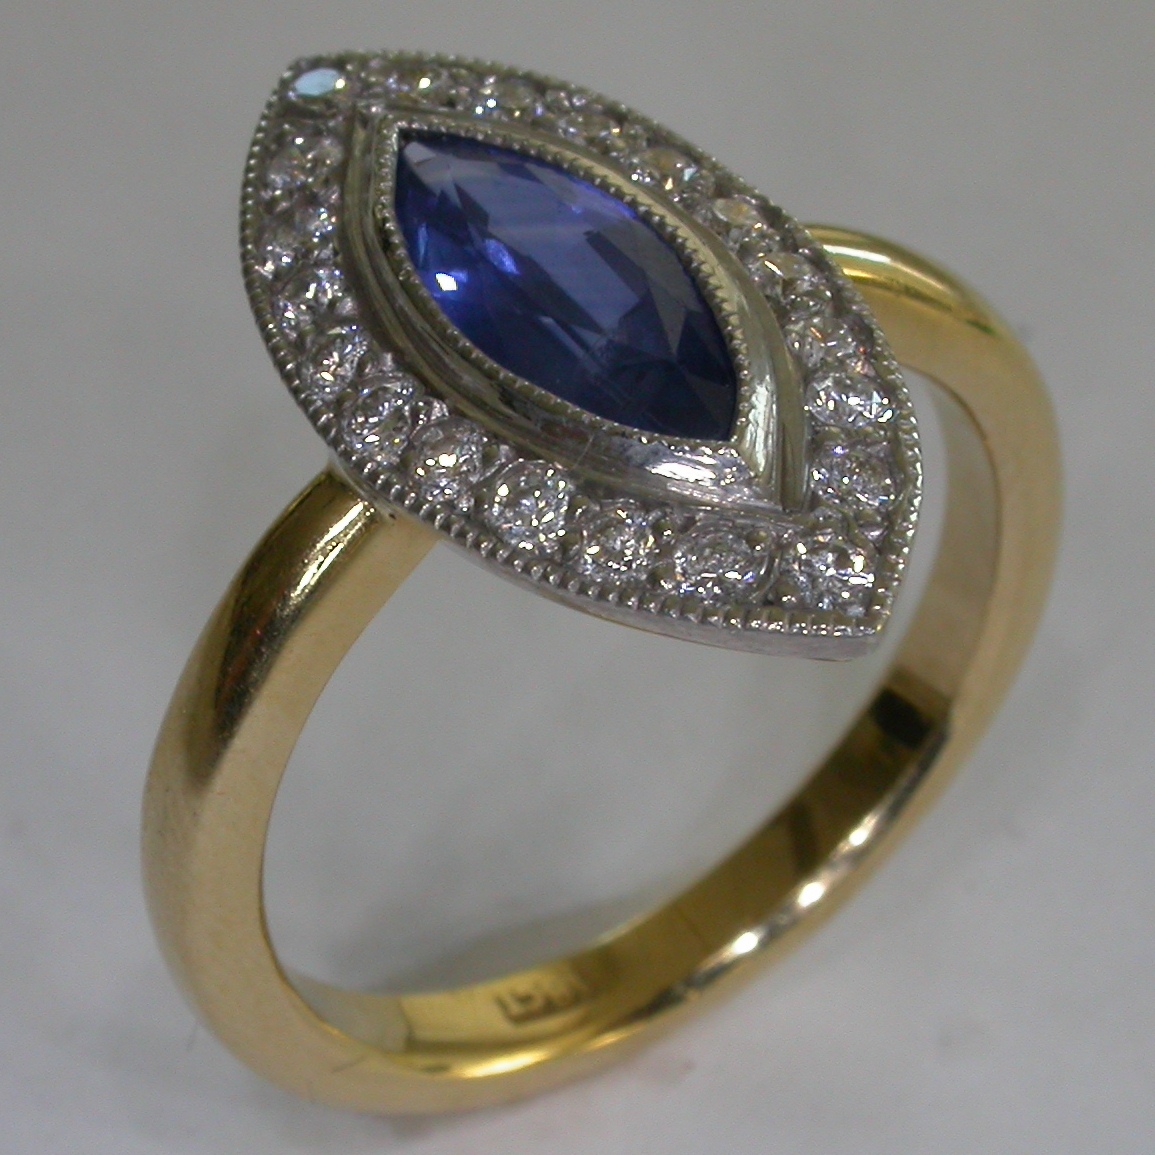 Colour Stone Engagement Rings in Melbourne - #6269